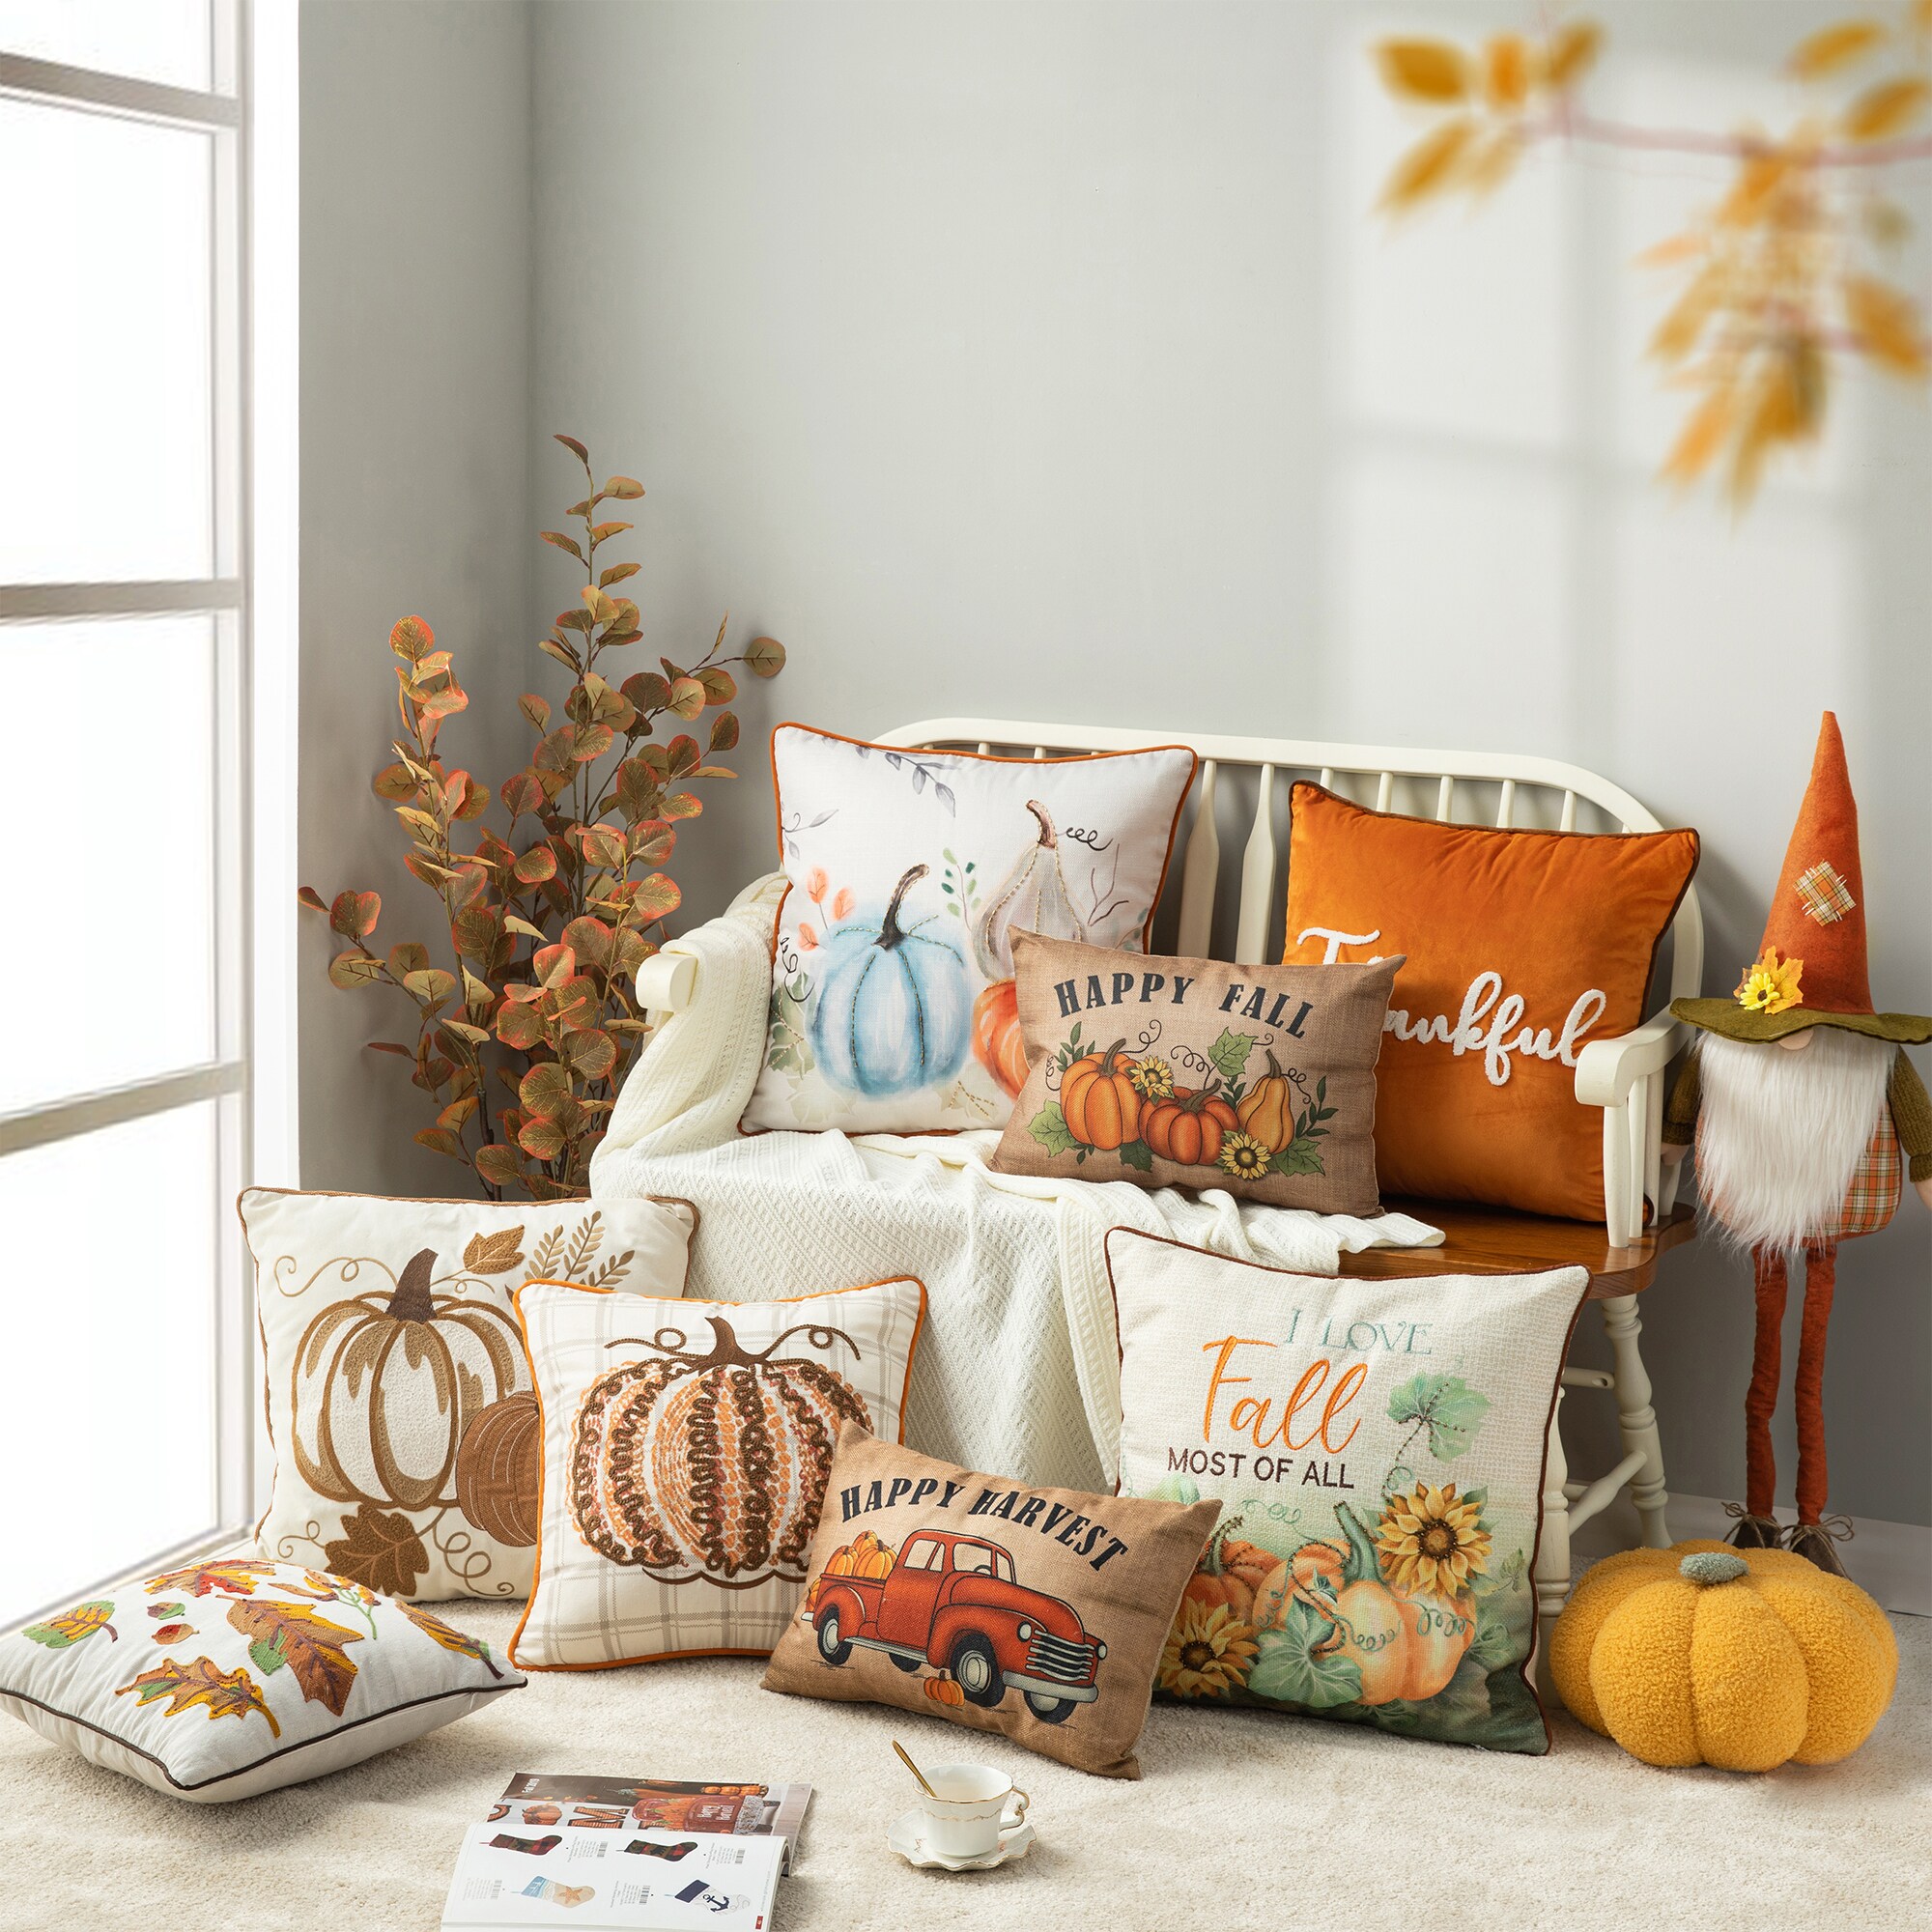 Fall Harvest Decorative Throw Pillow Covers 18x18in